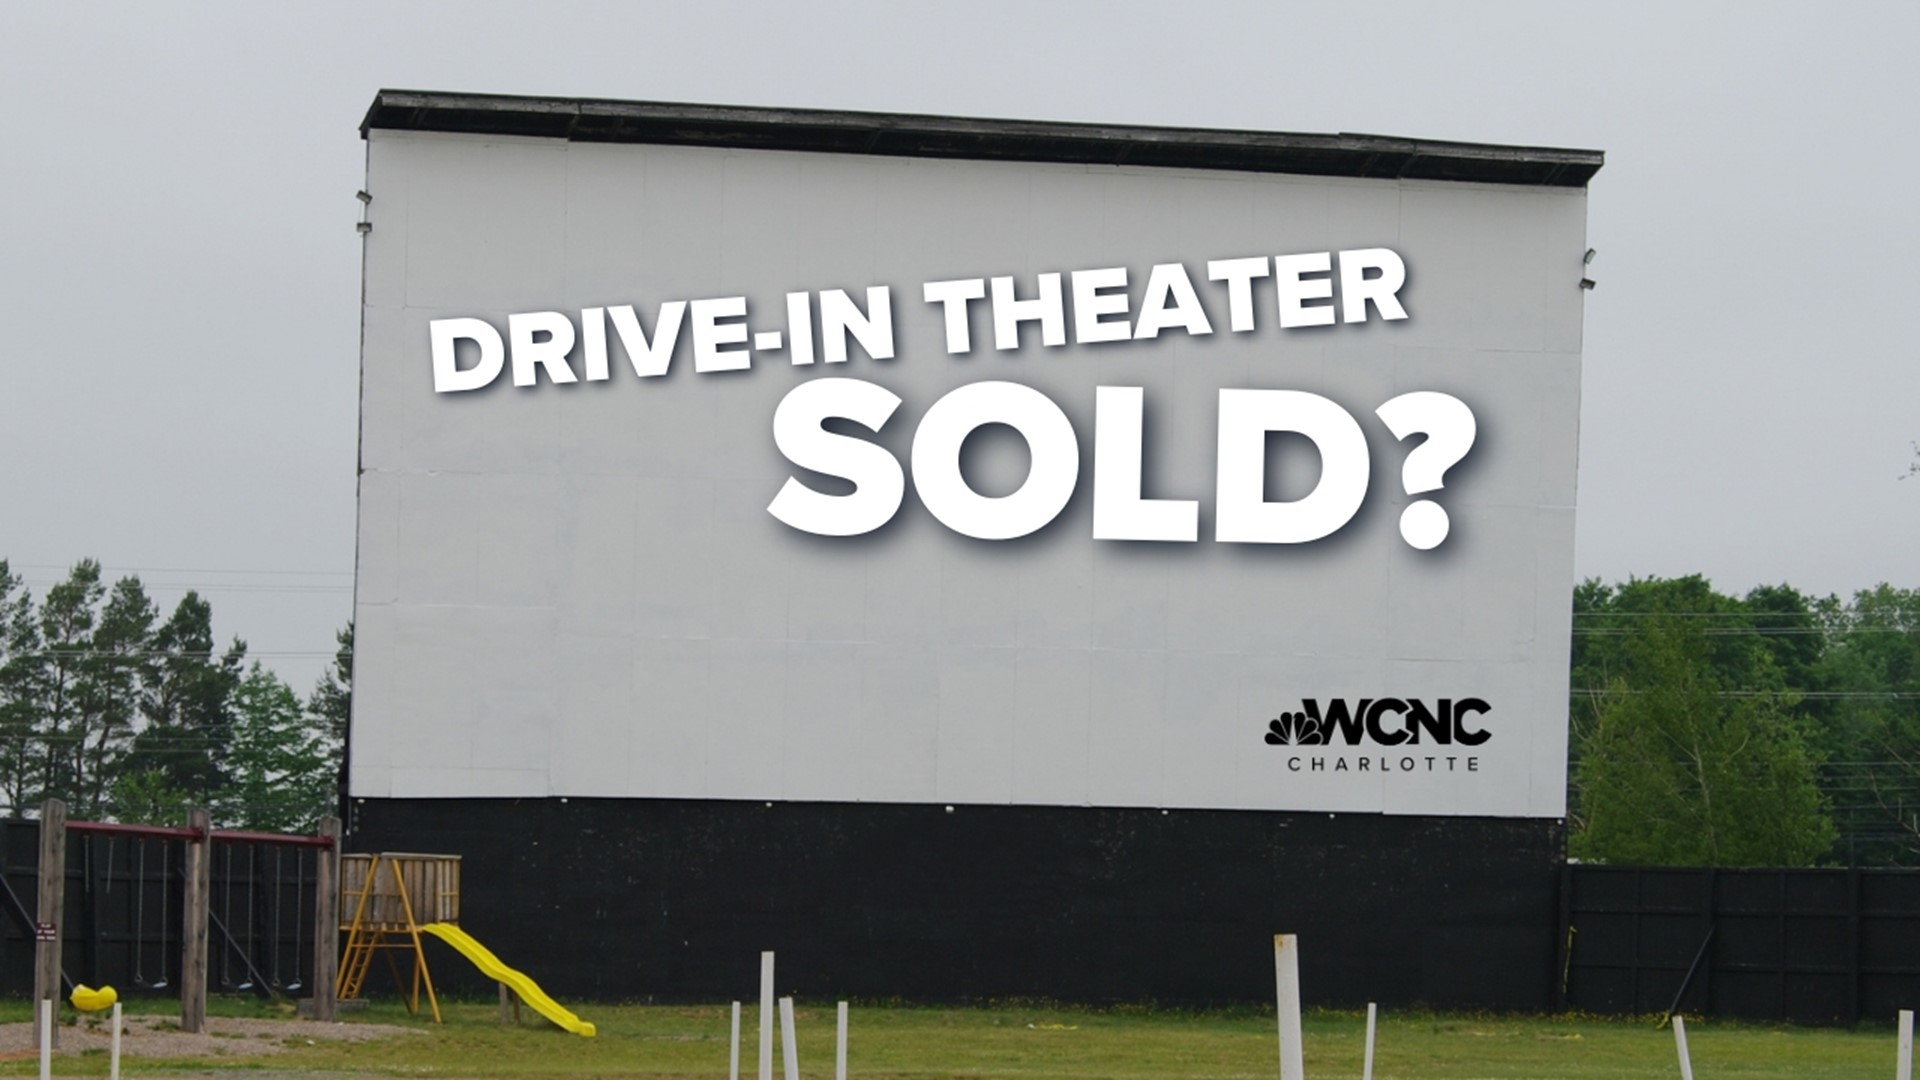 The beloved Kings Mountain Hounds drive-in movie theater announced it is closing down for good.